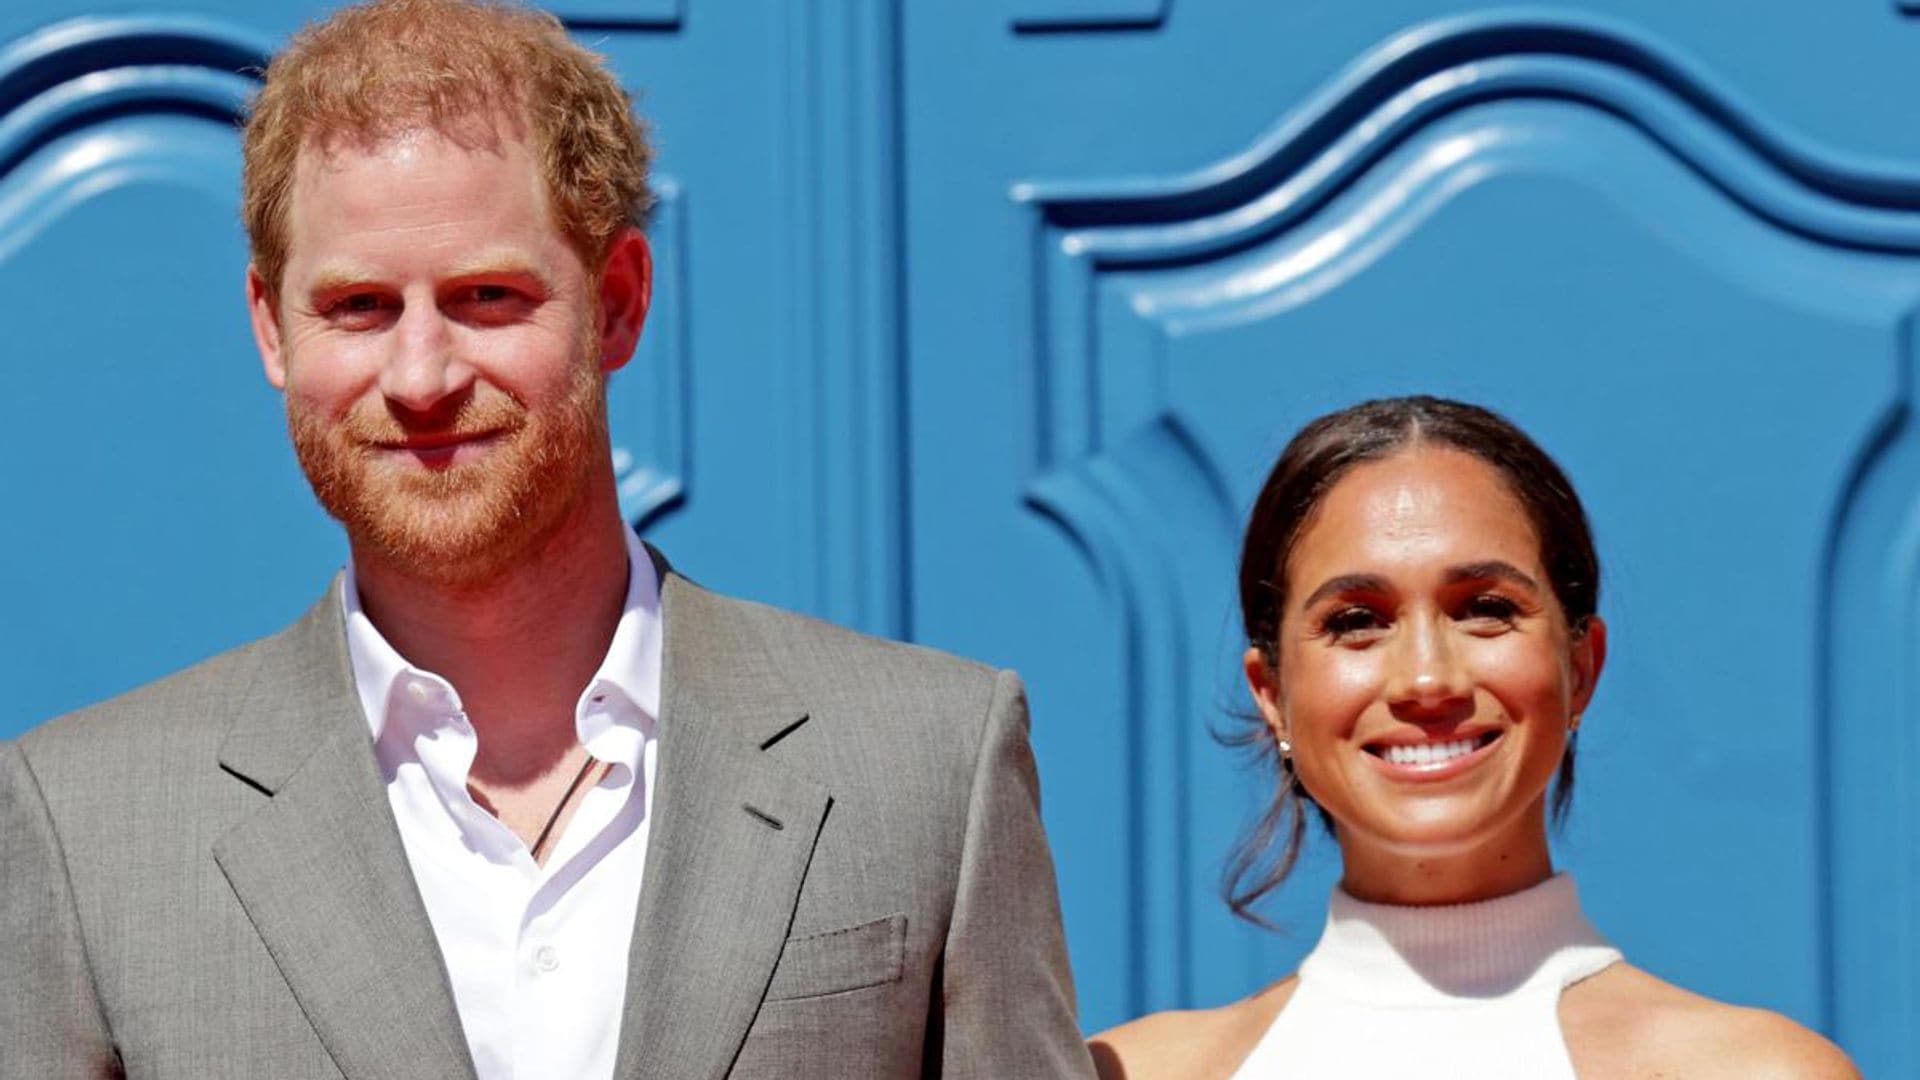 New photos of Meghan Markle and Prince Harry from UK visit released